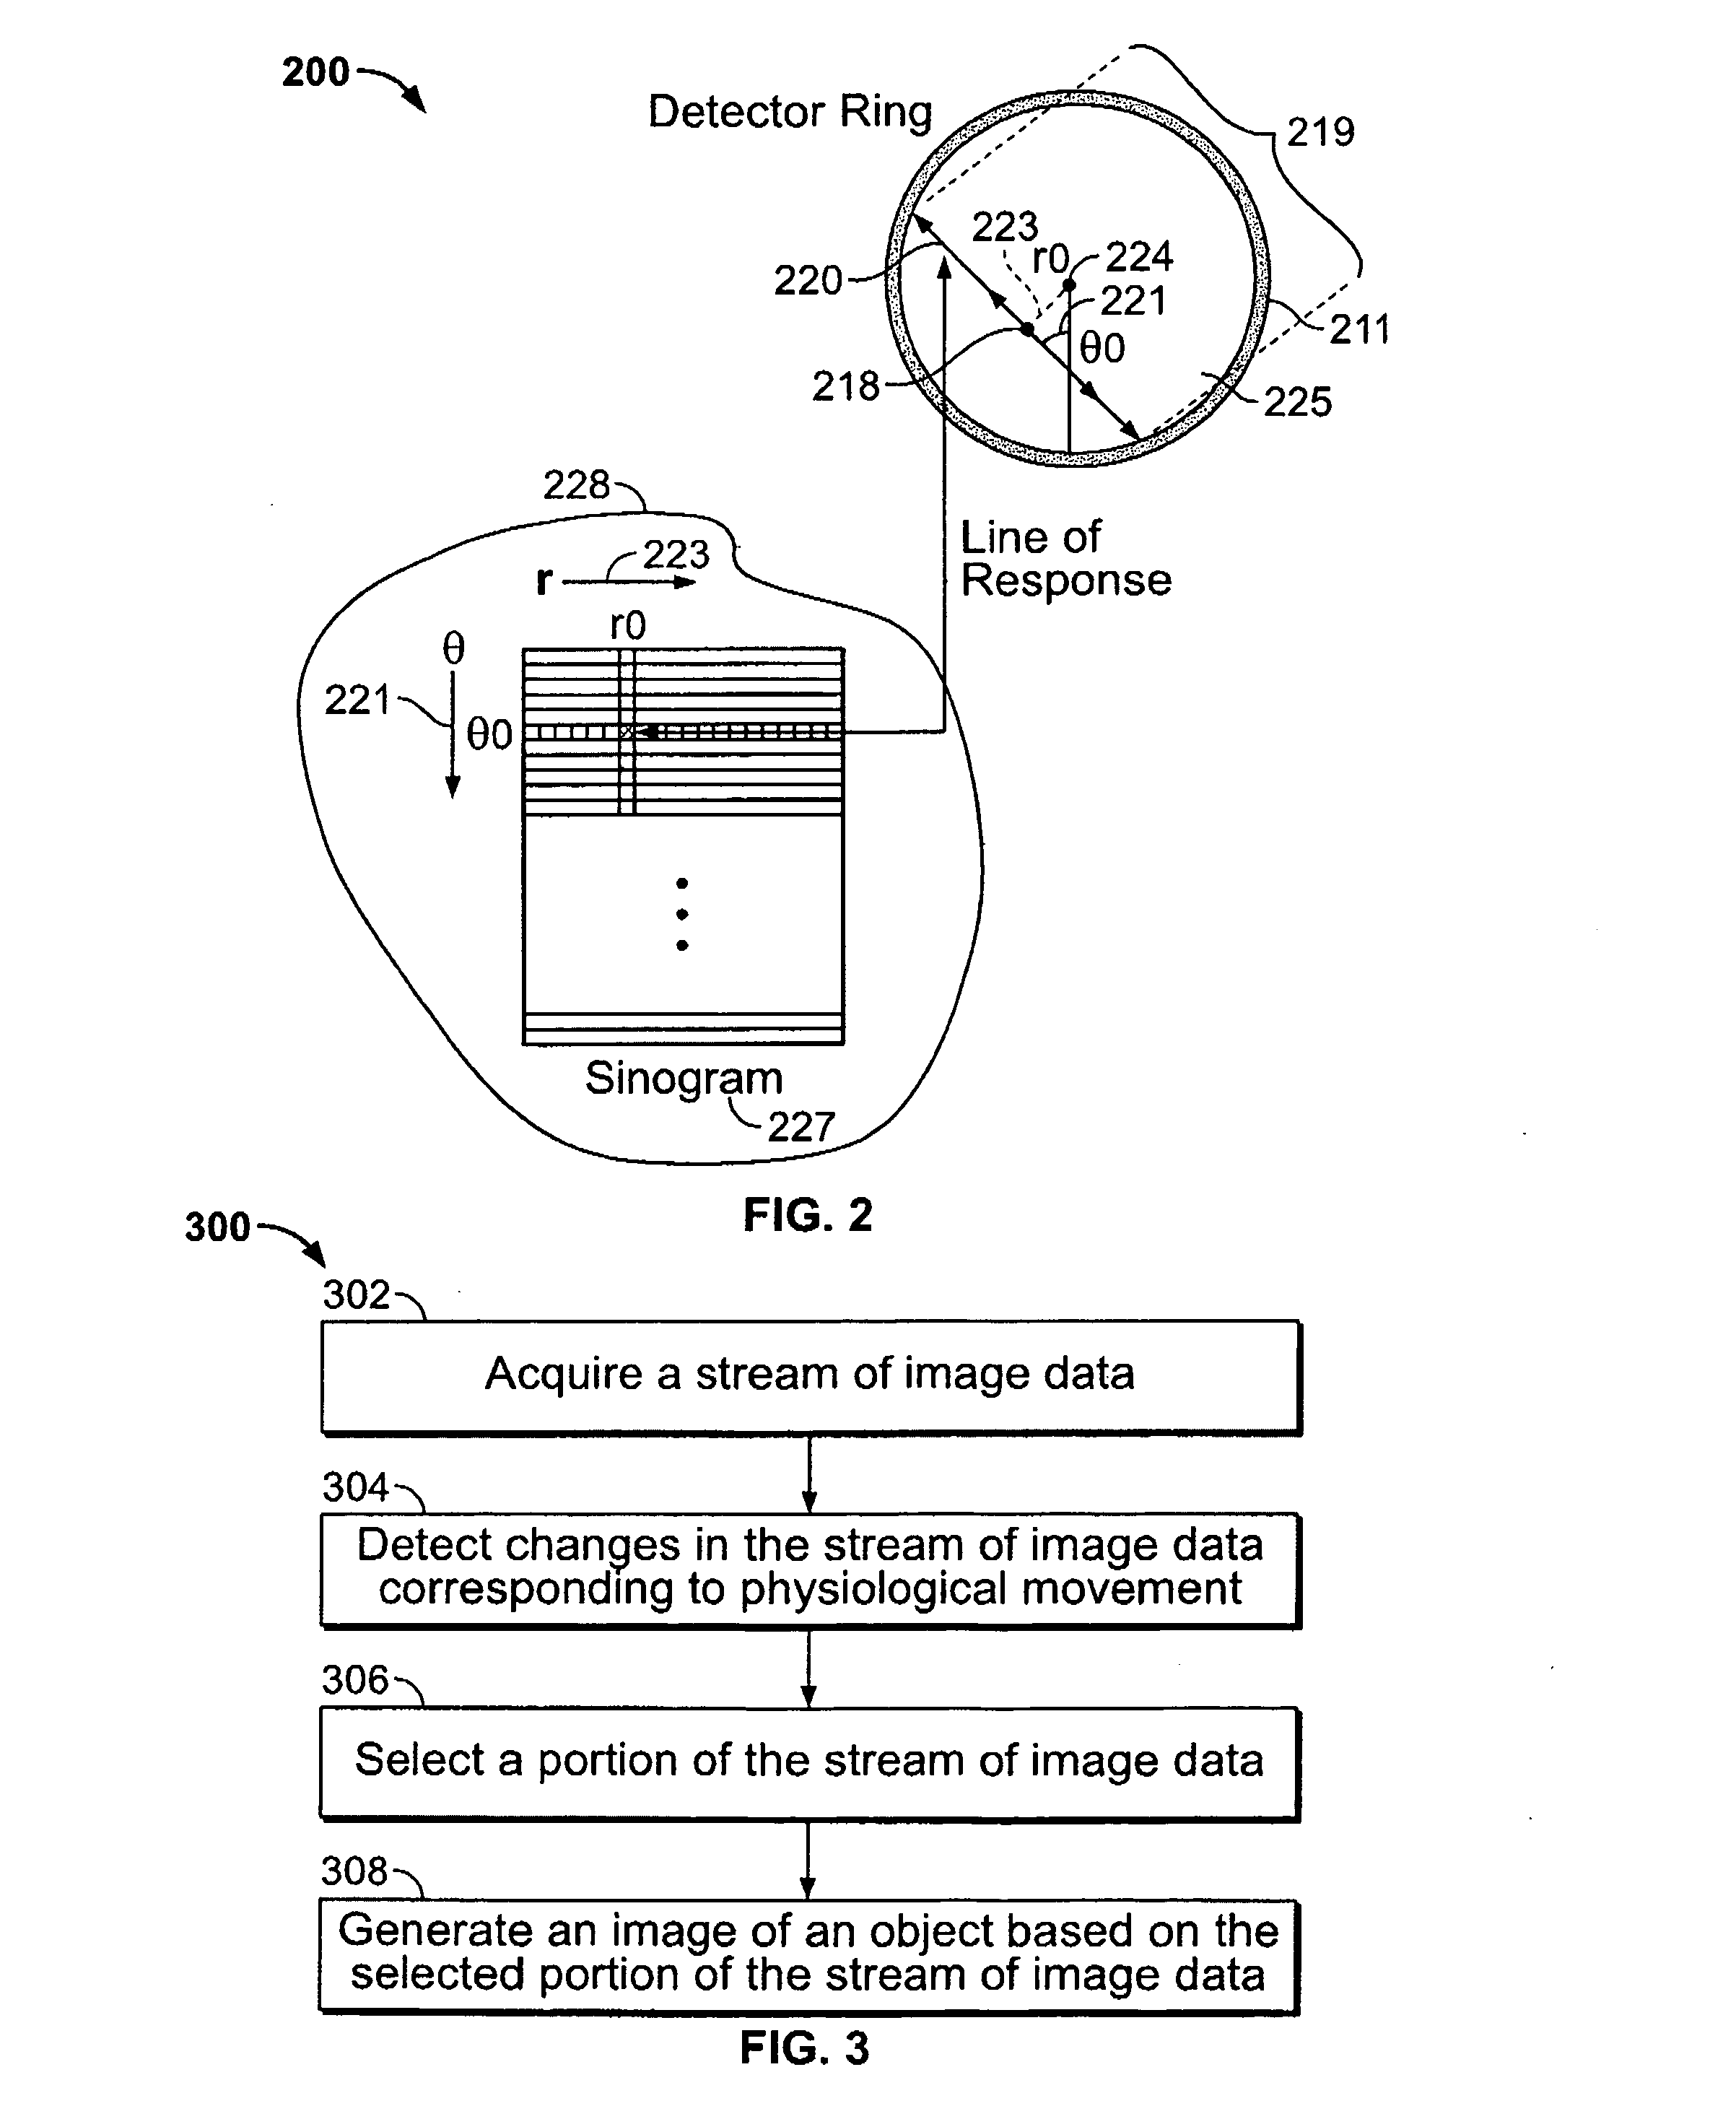 Device-less gating of physiological movement for improved image detection